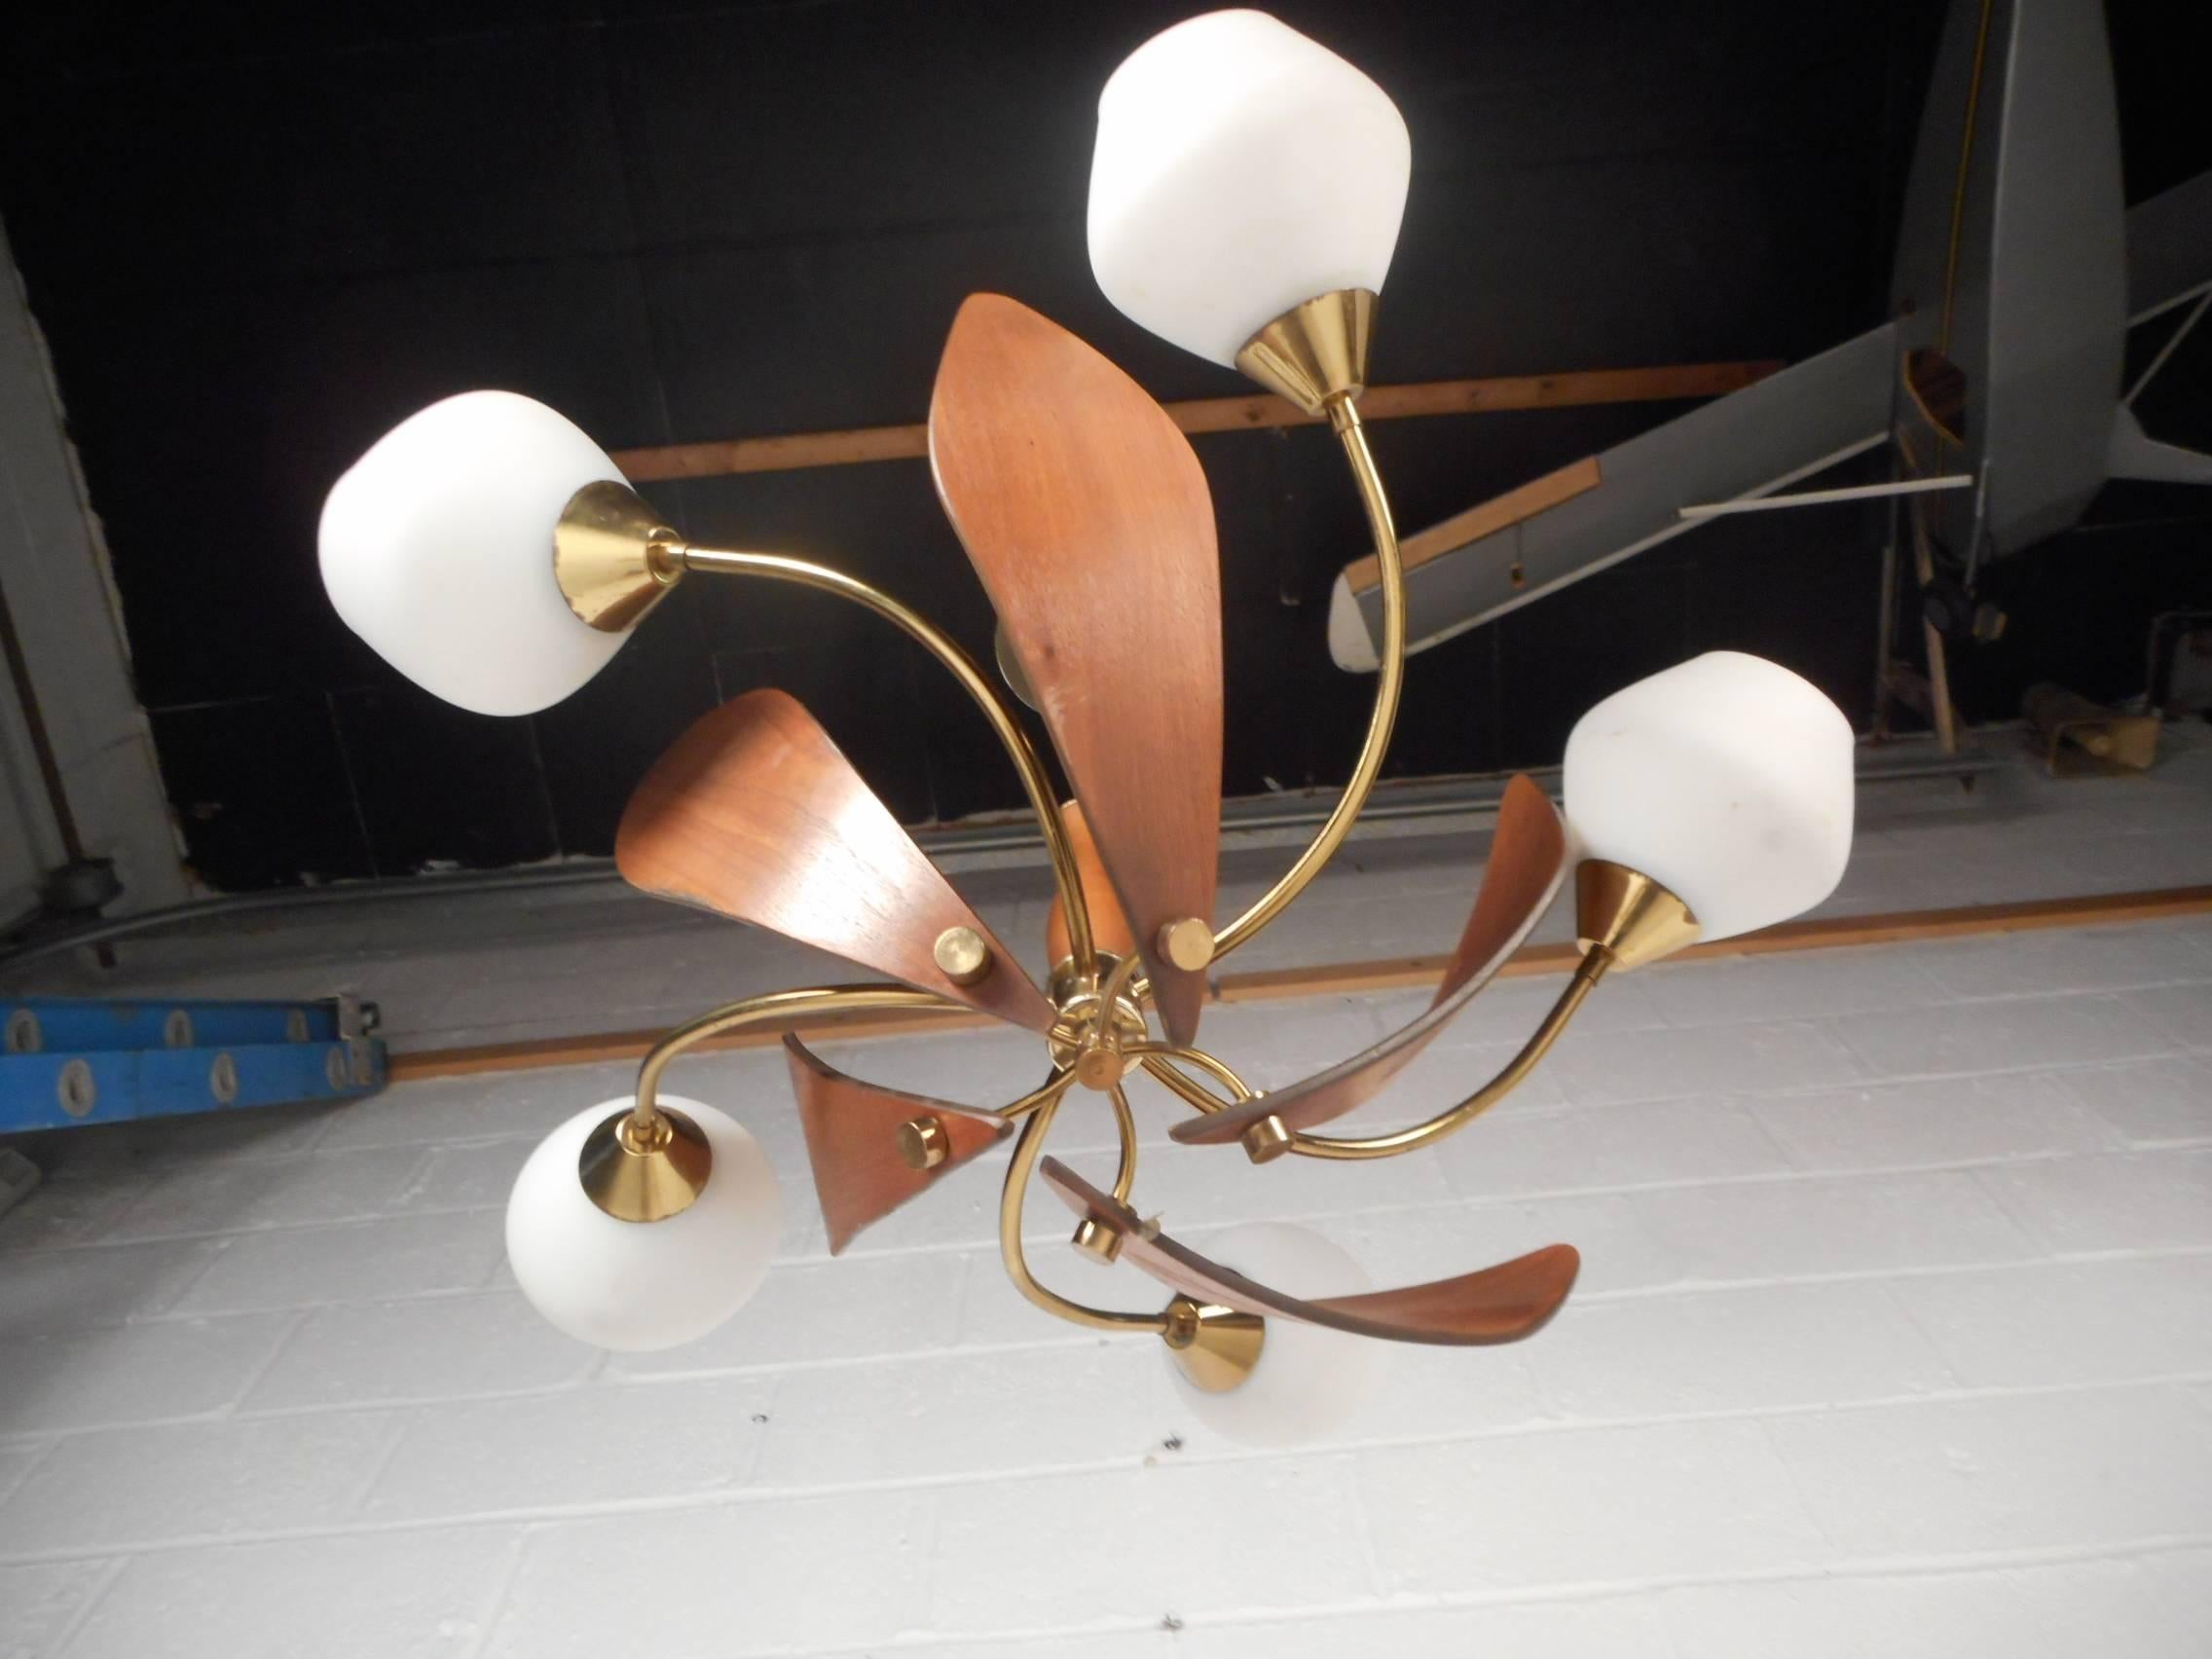 This stunning vintage modern hanging lamp features sculpted teak wood and lovely white globes over each fixture. Quality design with bent brass rods running to each fixture. Elegant Mid-Century piece looks incredible when light bounces off of the